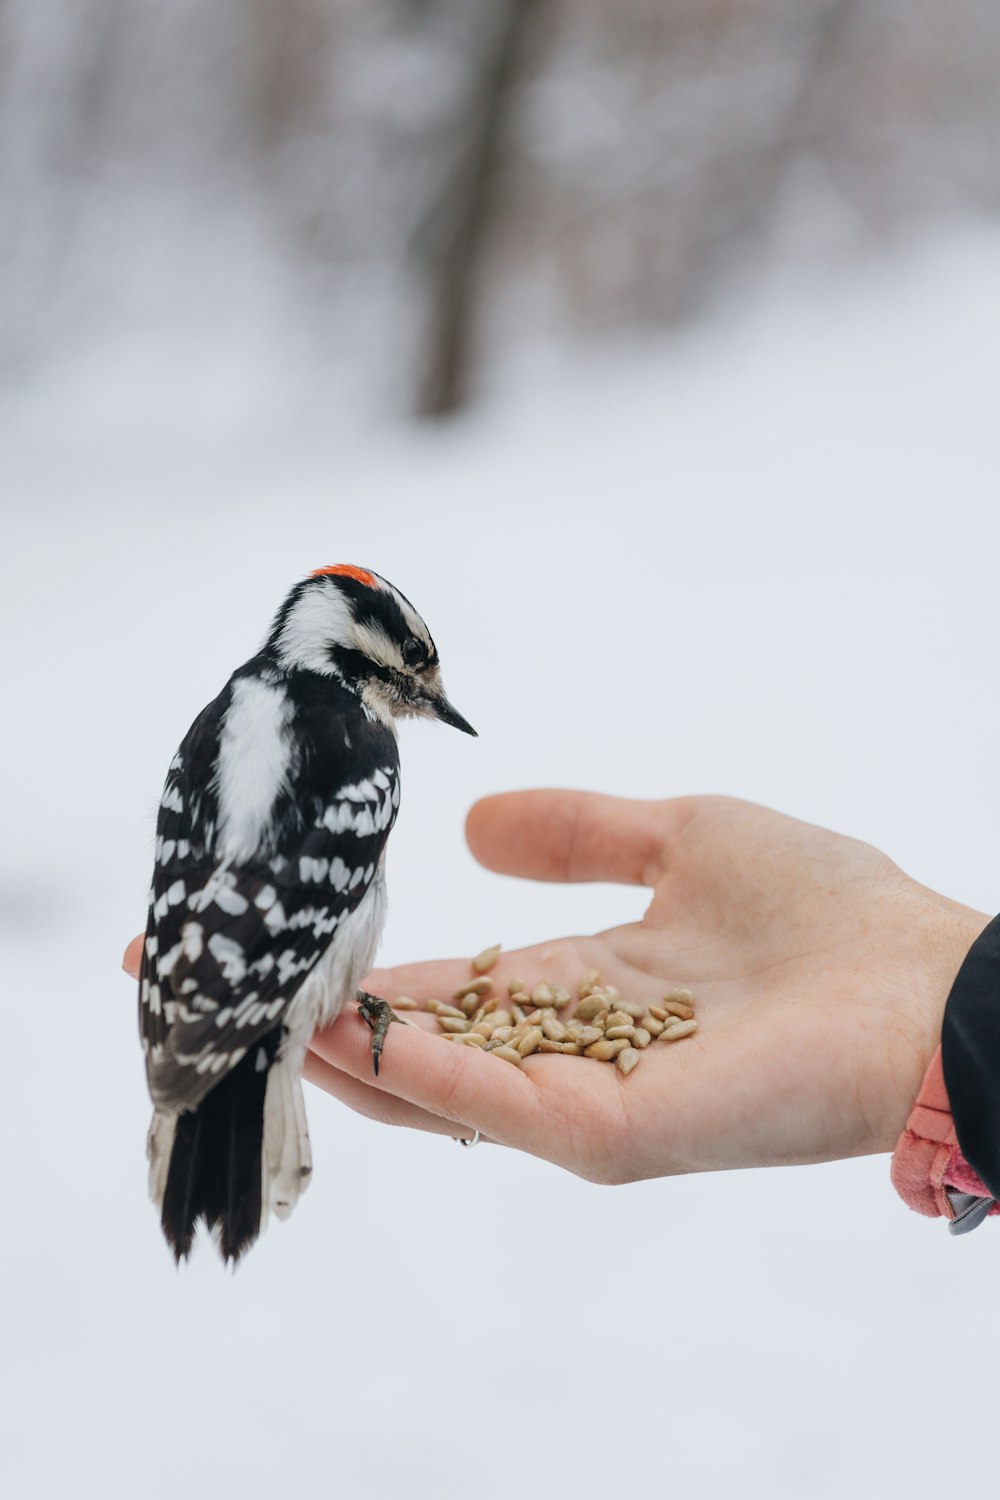 Hairy woodpecker on person's hand